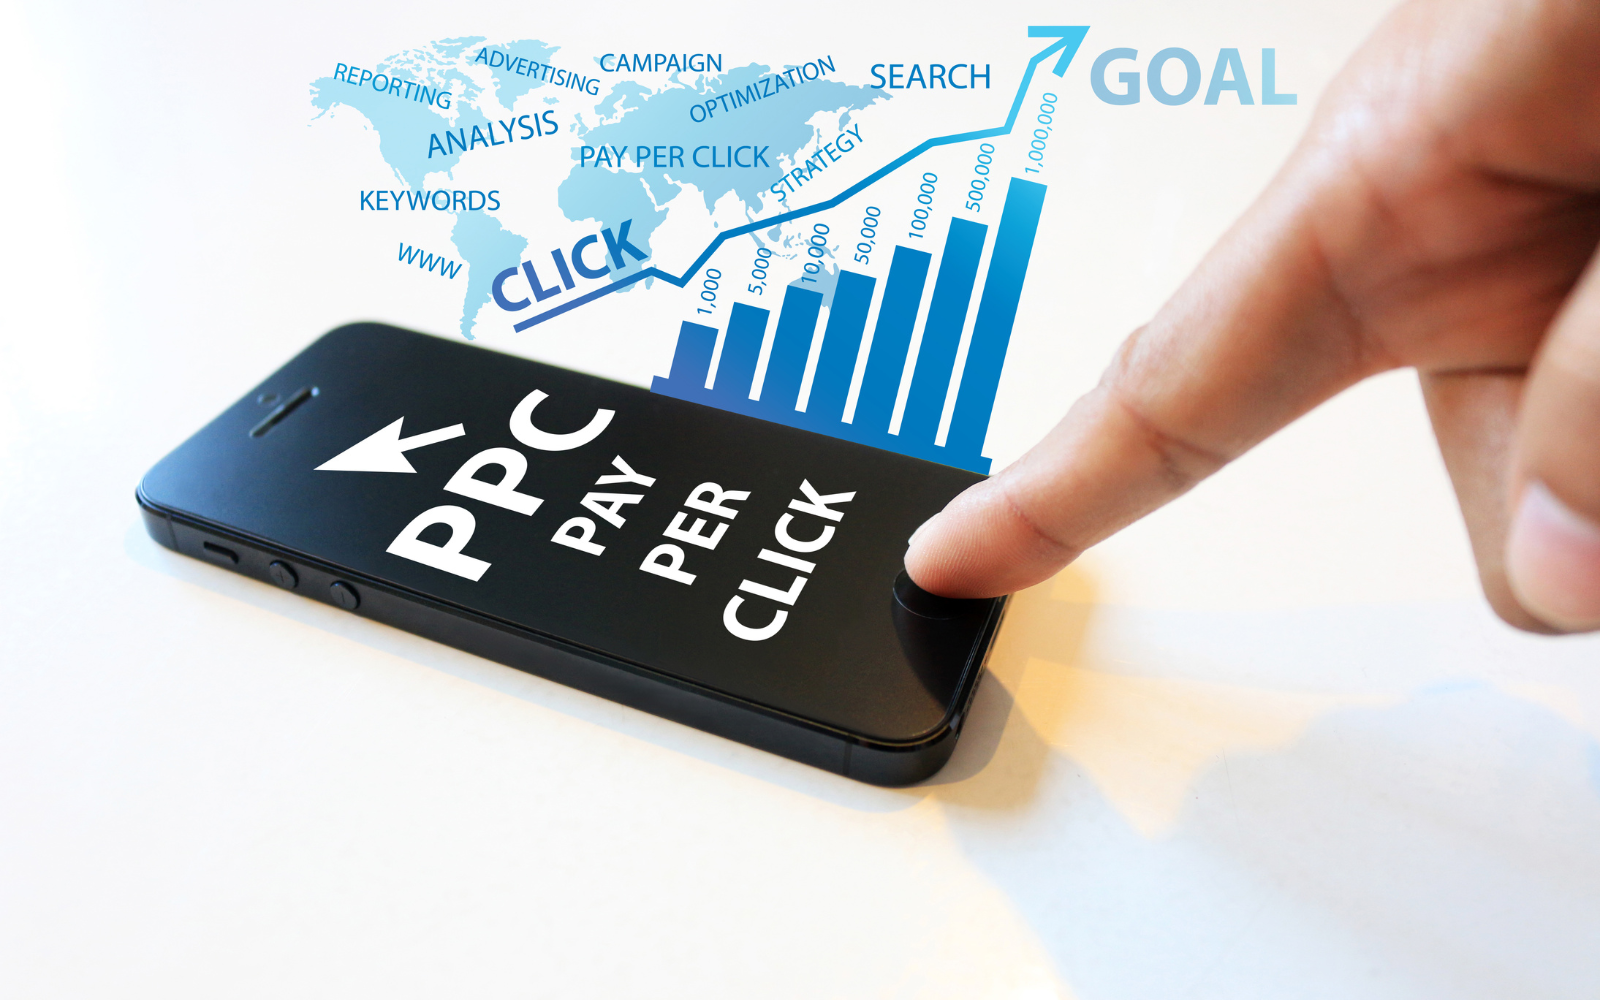 10 Paid Search & PPC Planning Best Practices via @sejournal, @LisaRocksSEM